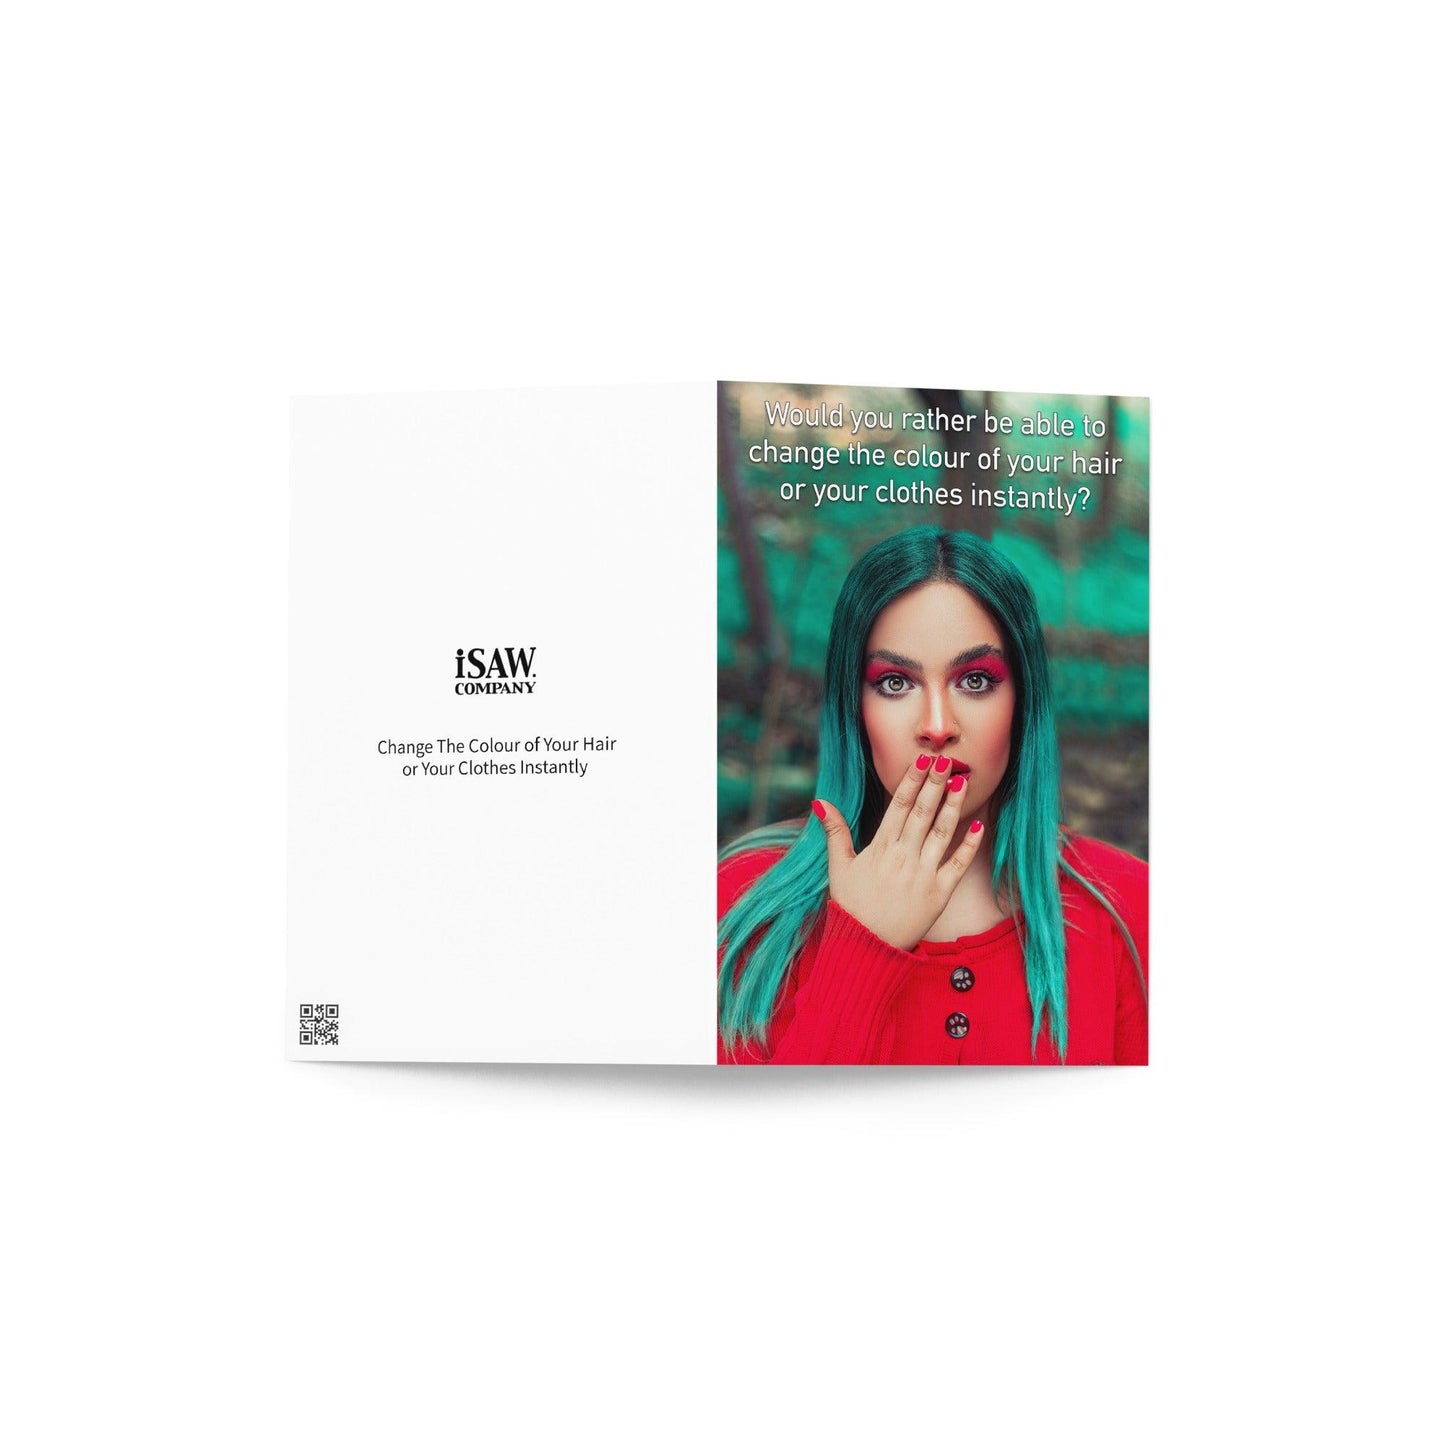 Change The Colour of Your Hair or Your Clothes Instantly - Note Card - iSAW Company